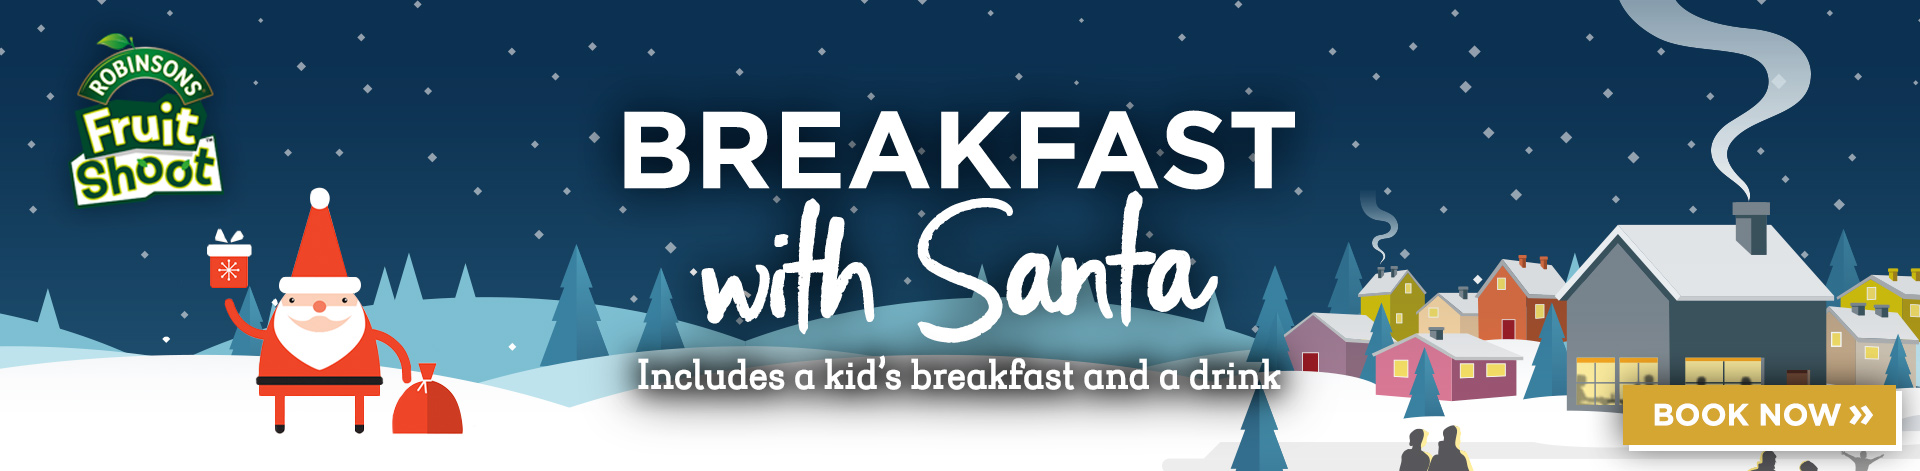 Breakfast with Santa menu at The Peacehaven